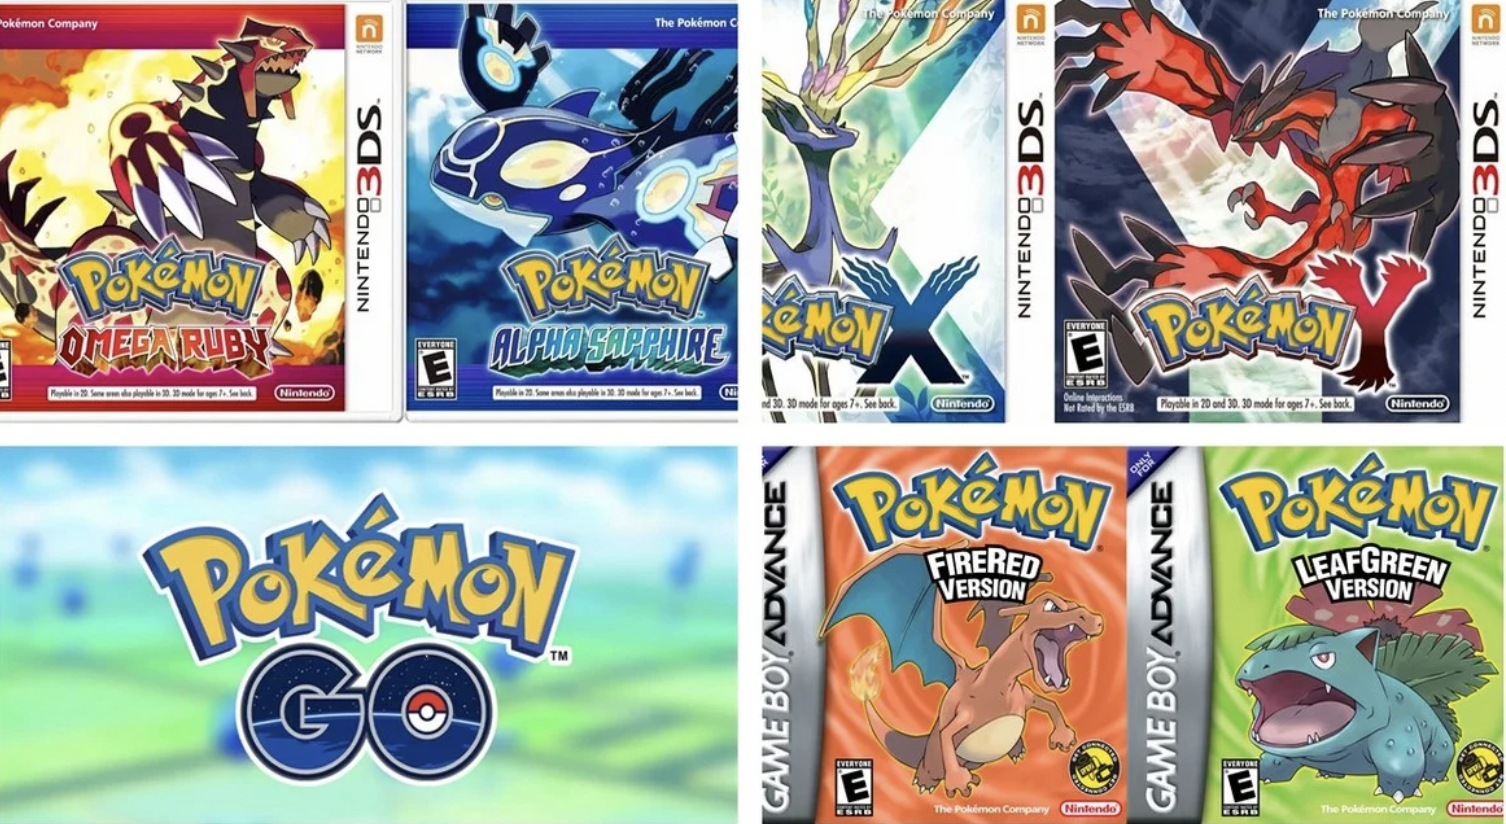 The List 9 Good Pokemon Games, With Free ROMs To Play GBA